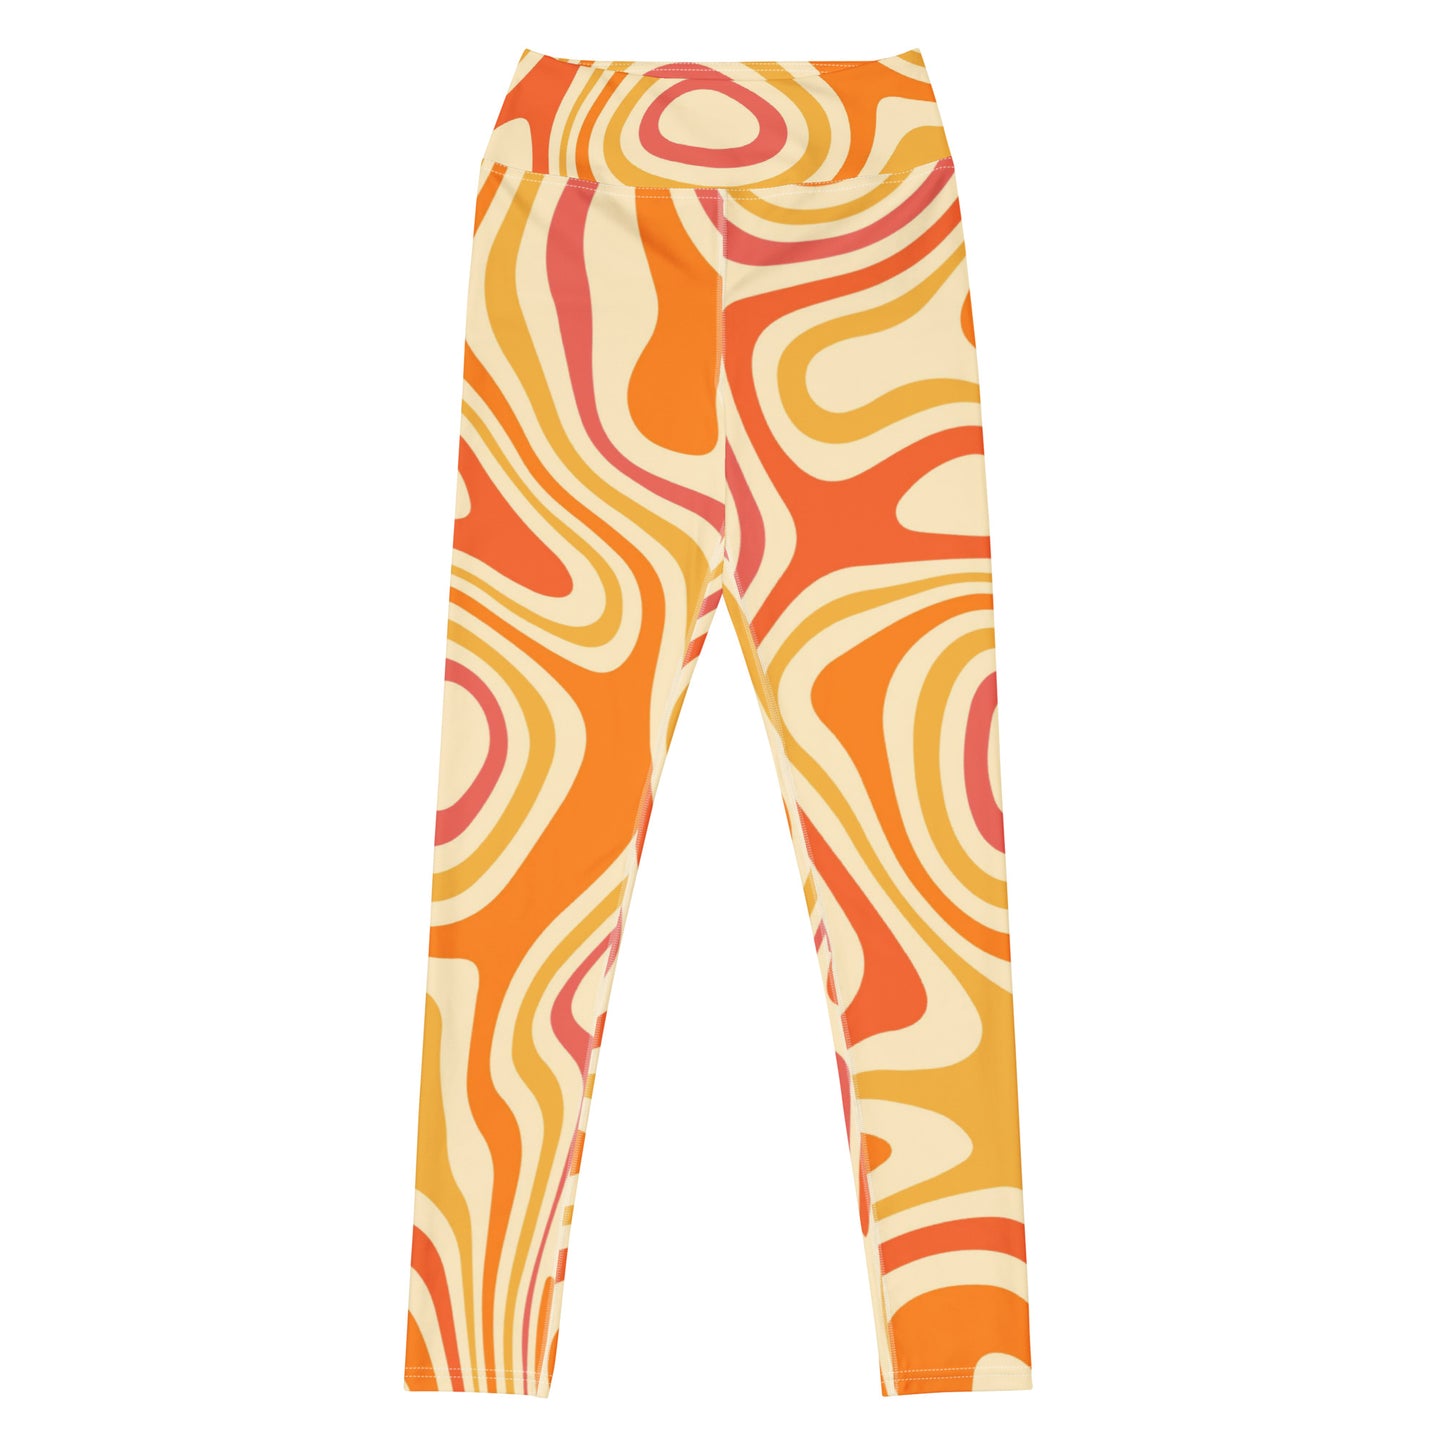 Funky Yoga Leggings Women, Orange Trippy 70s High Waisted Pants Cute Printed Graphic Workout Running Gym Designer Tights Starcove Fashion